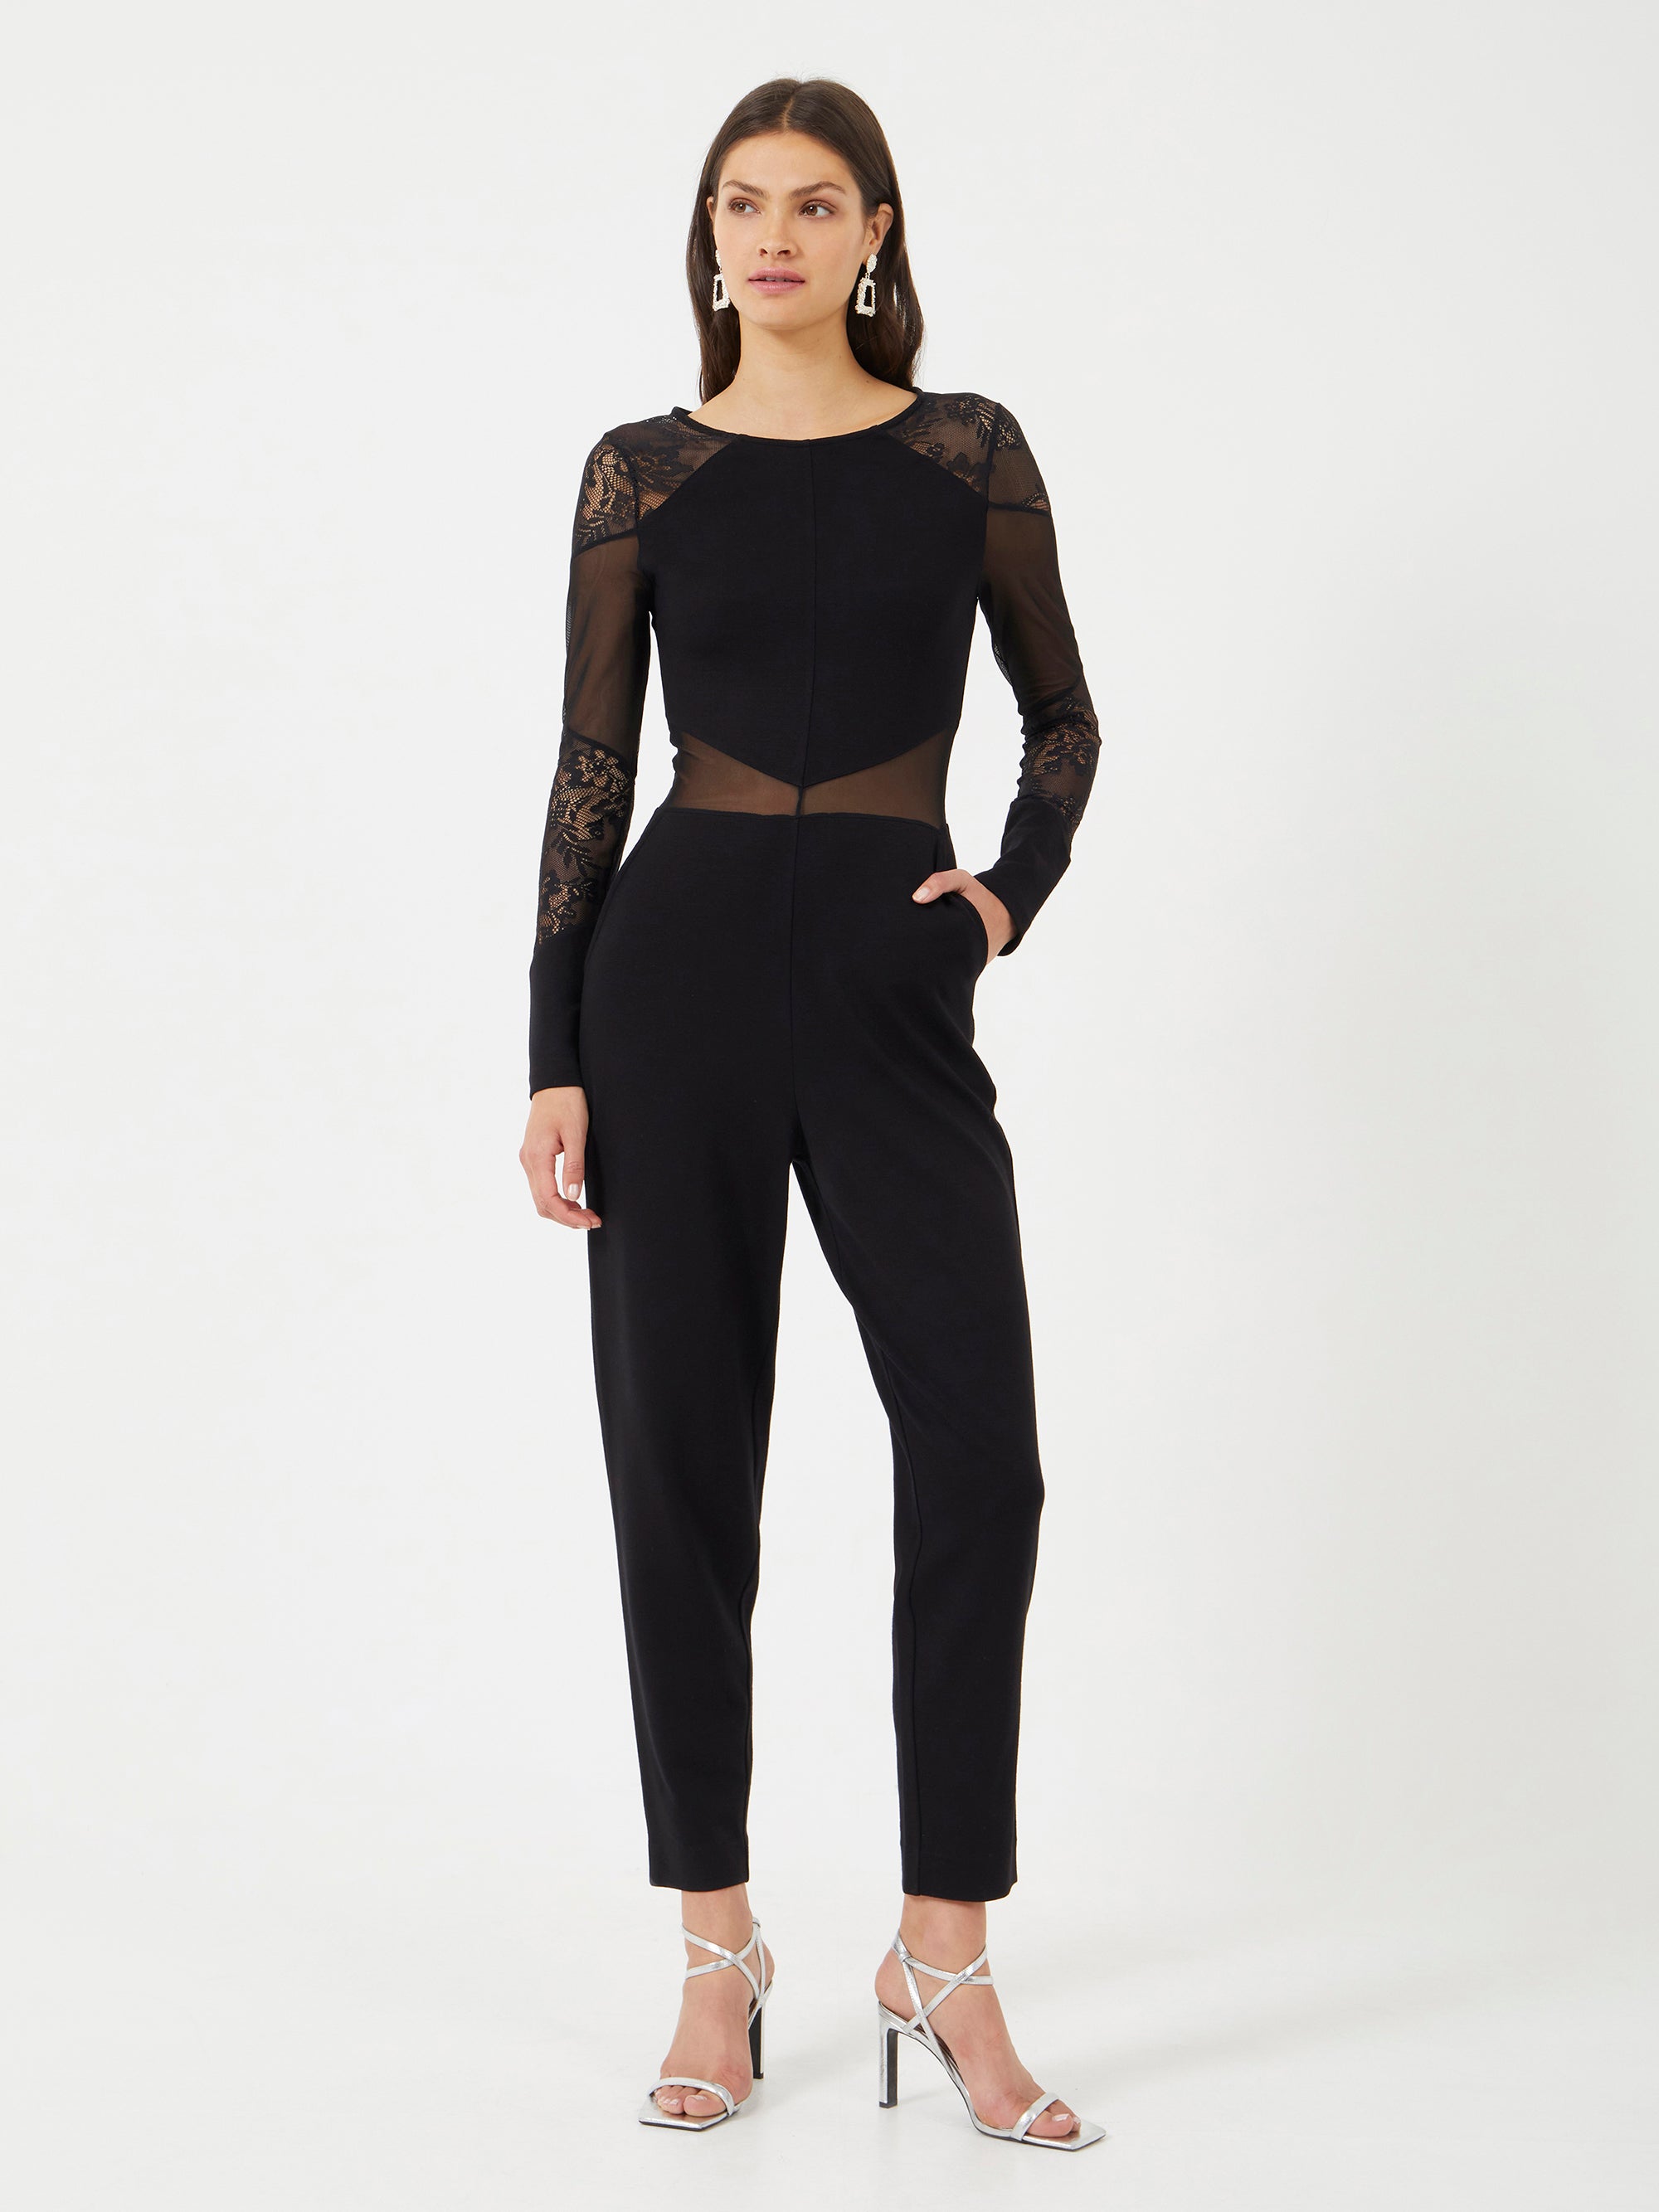 French Connection - Vivien Panelled Long Sleeved Jumpsuit | French Connection |  Jumpsuits & Playsuits | 10 - Black - Size: 10